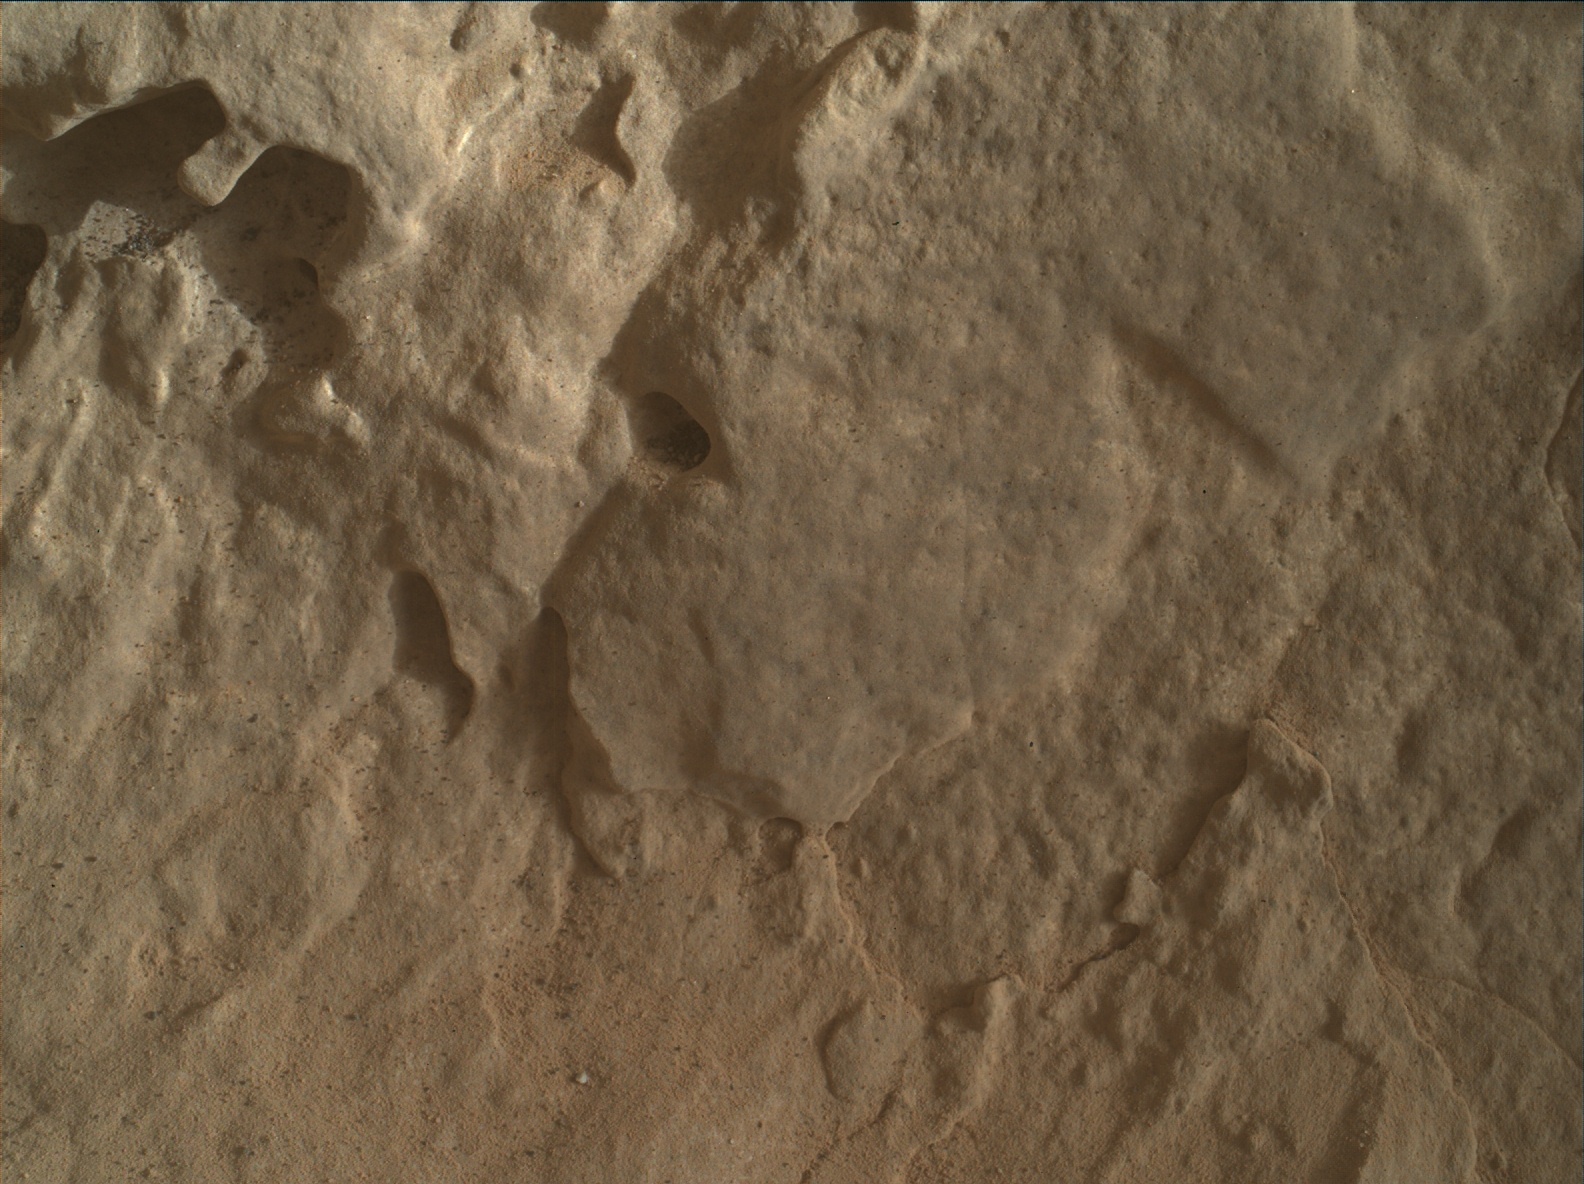 Nasa's Mars rover Curiosity acquired this image using its Mars Hand Lens Imager (MAHLI) on Sol 3115